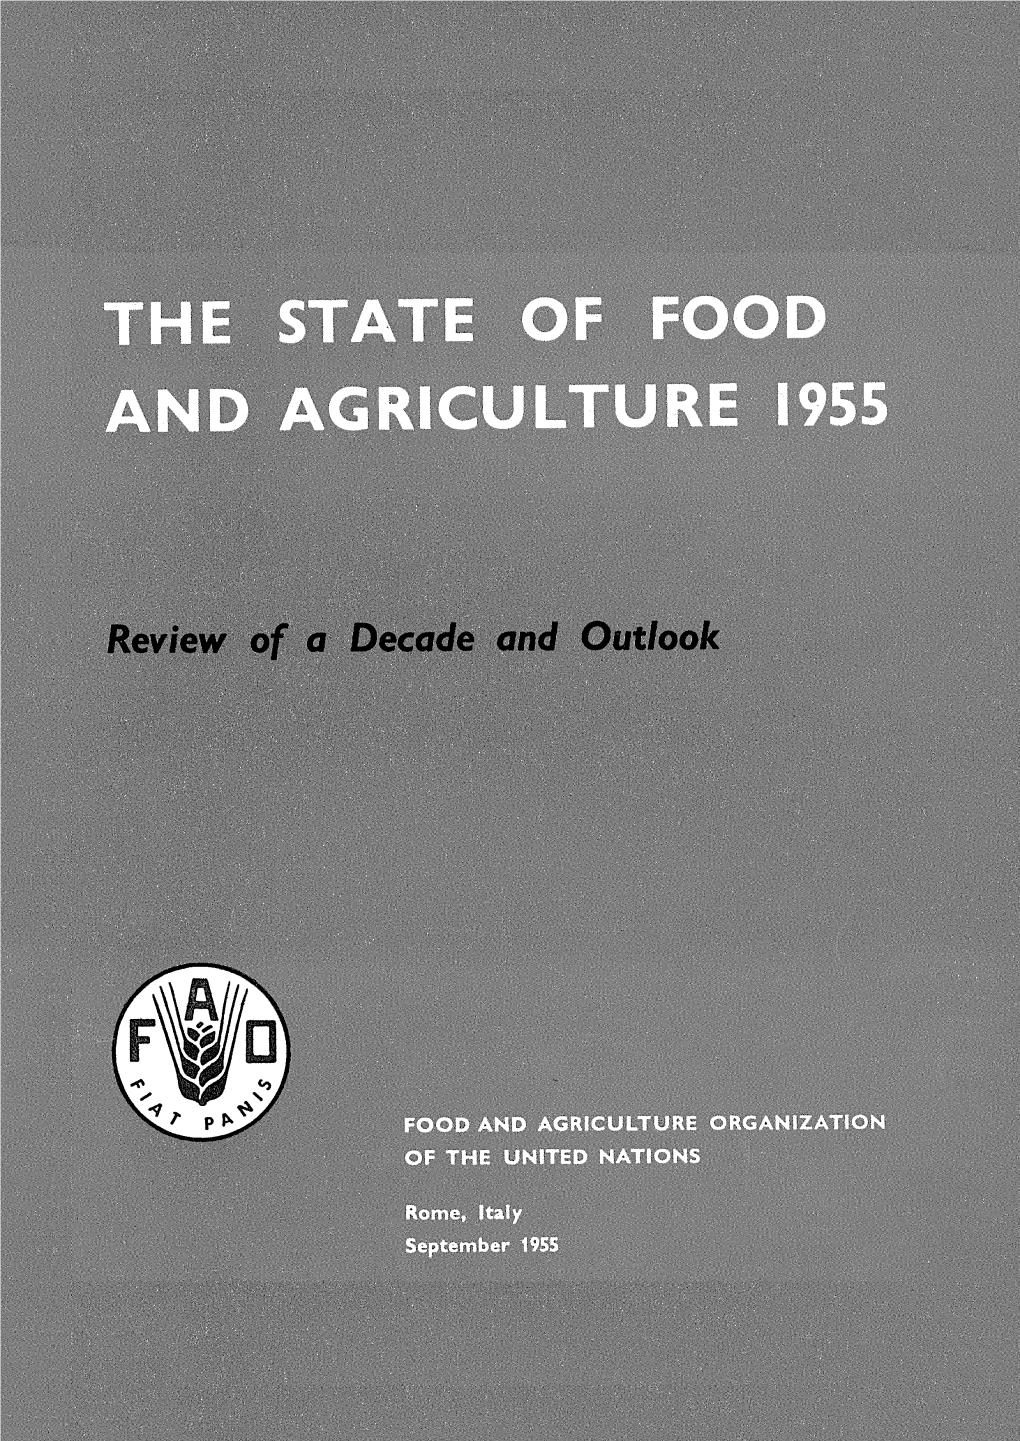 The State of Food and Agriculture, 1955